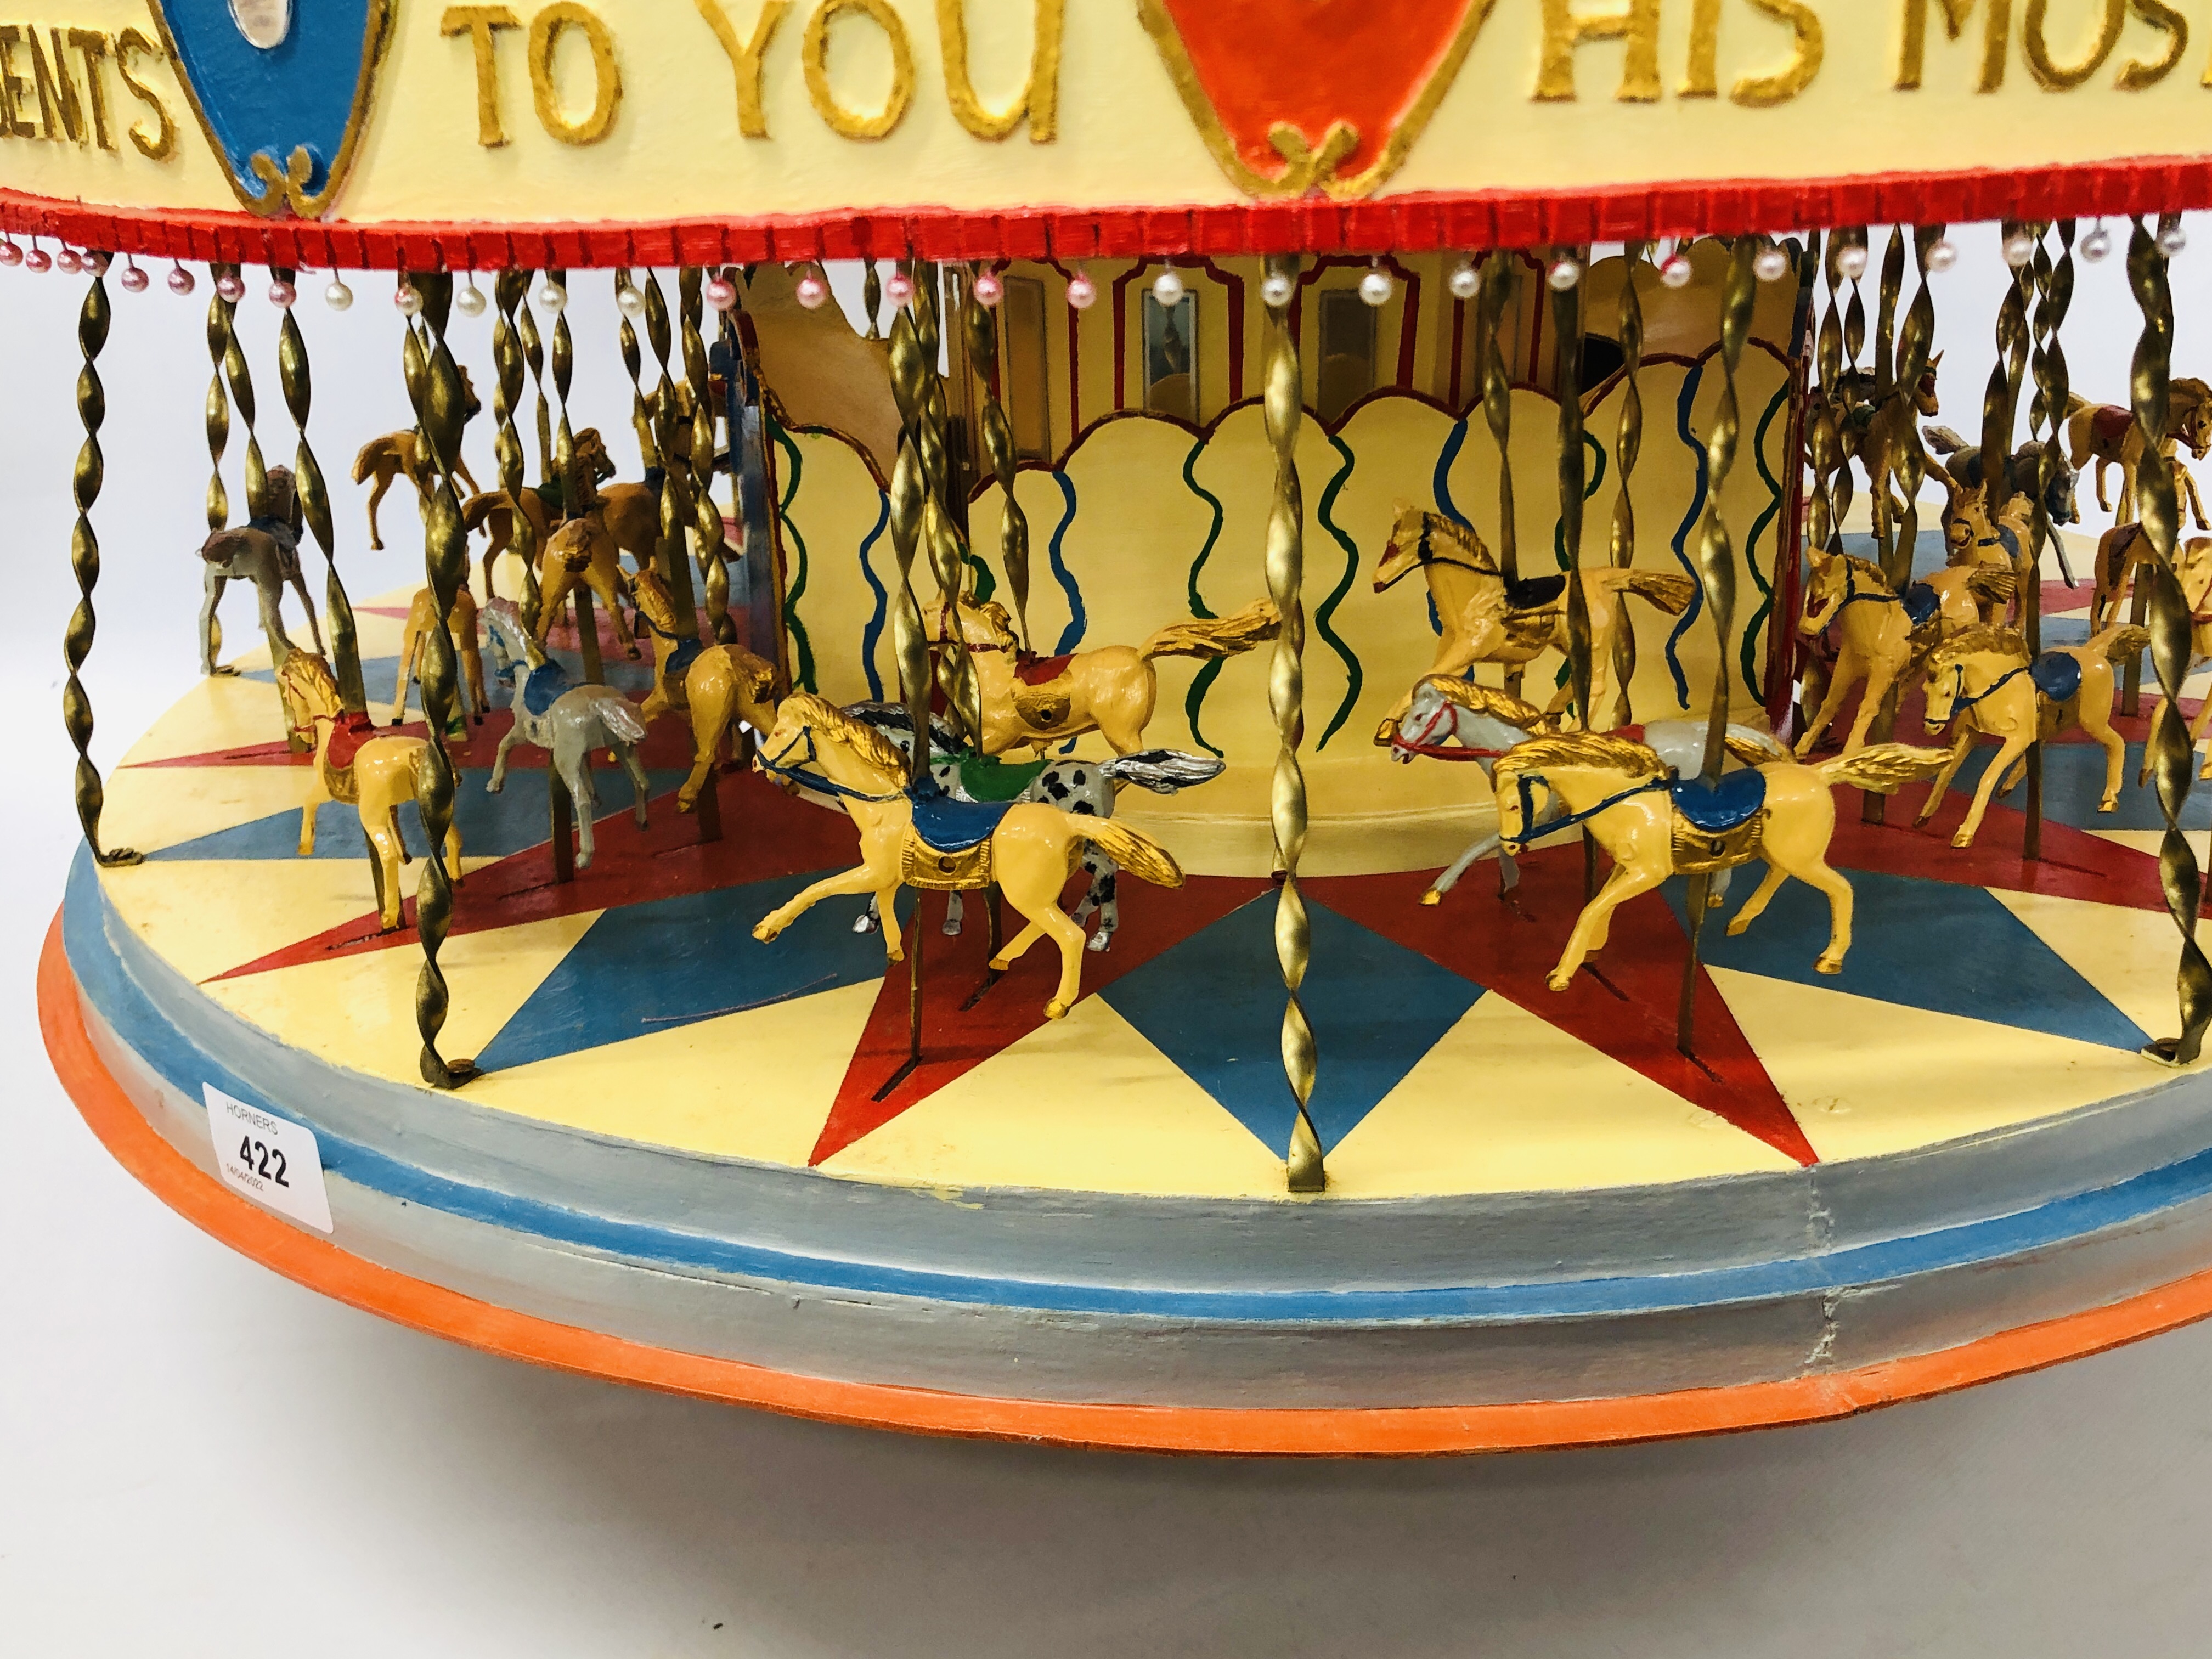 A VINTAGE HANDCRAFTED WOODEN MODEL OF A FAIRGROUND CAROUSEL WITH MOTORISED ACTION AND LIGHTS - - Image 4 of 10